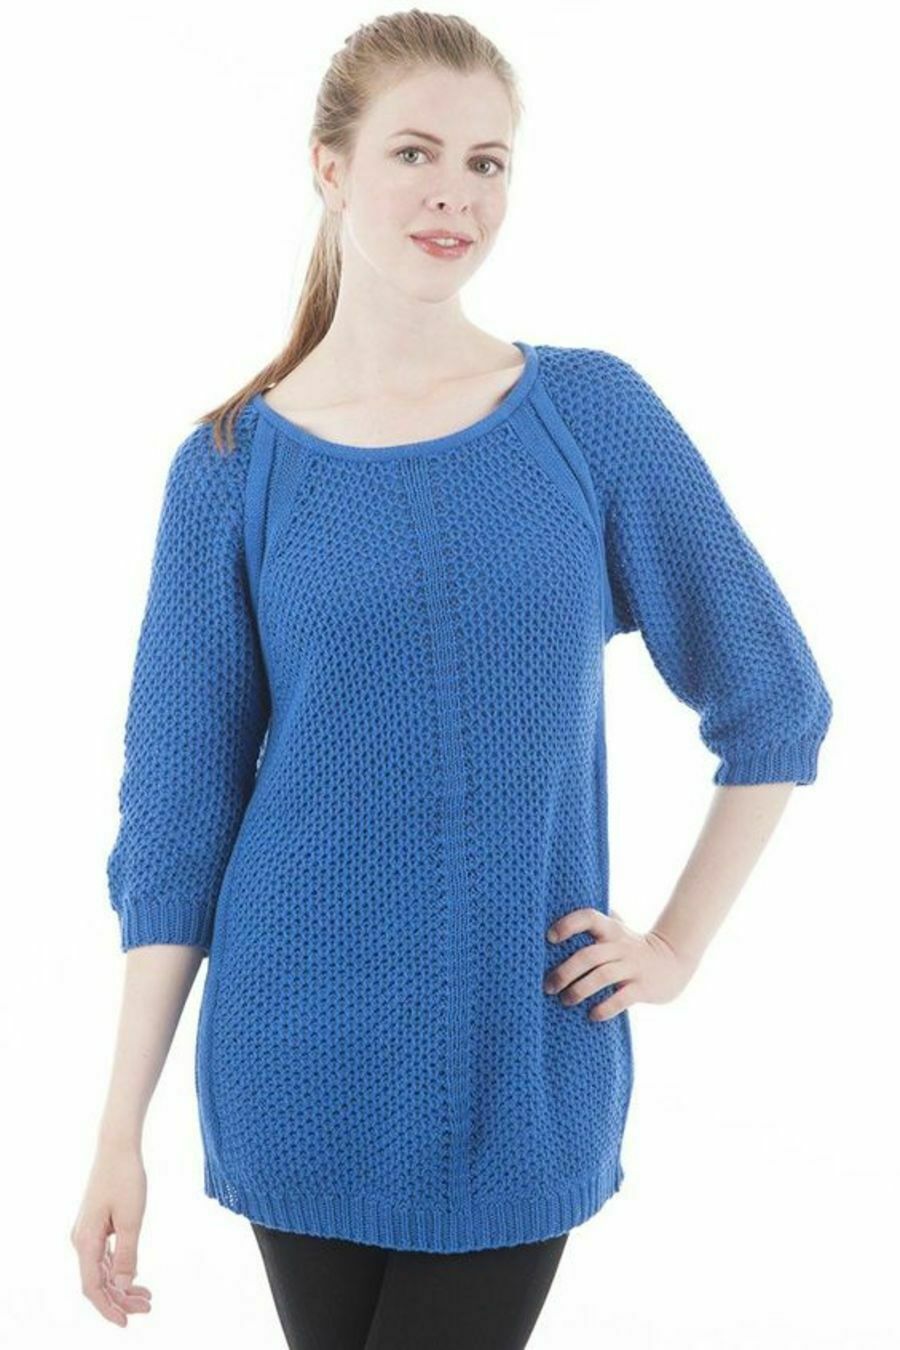 Blue Cable Knit 3/4 Sleeve Cotton Knitted Jumper